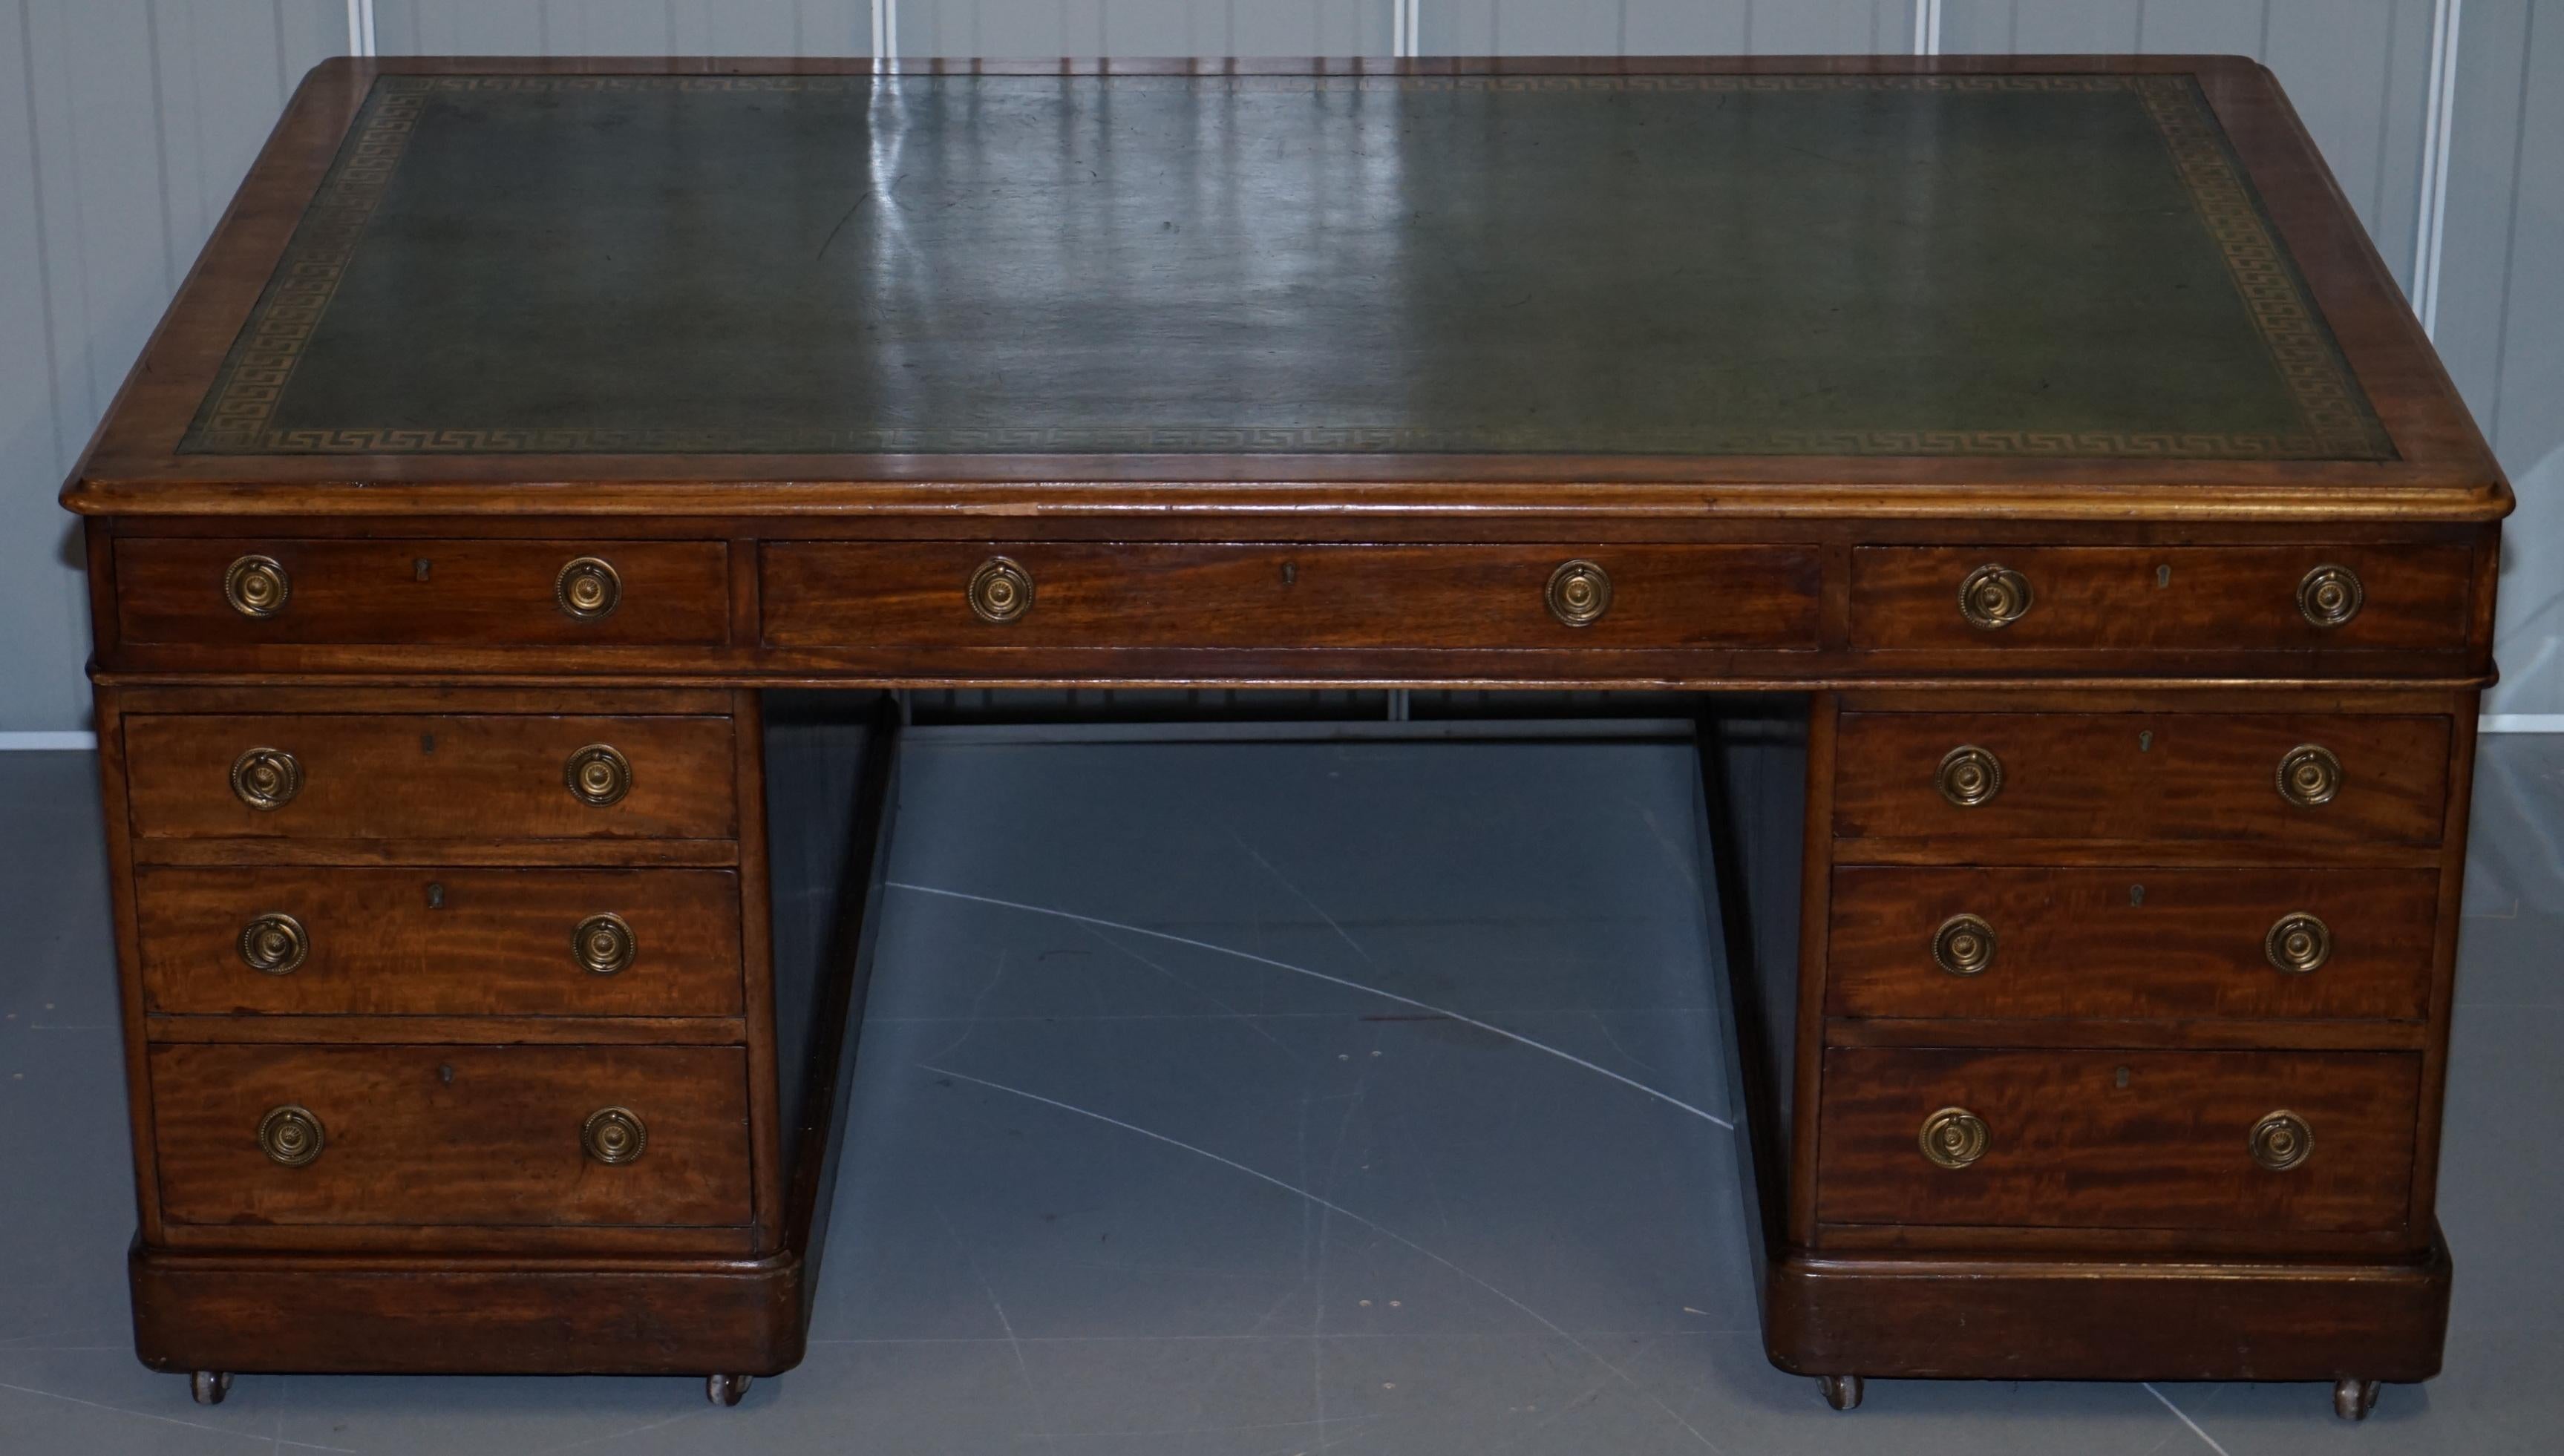 Wimbledon-Furniture

Wimbledon-Furniture is delighted to offer for sale this very rare original 12 drawer 2 cupboard Victorian mahogany luxury premium twin pedestal partner desk with green gold leaf embossed leather top

Please note the delivery